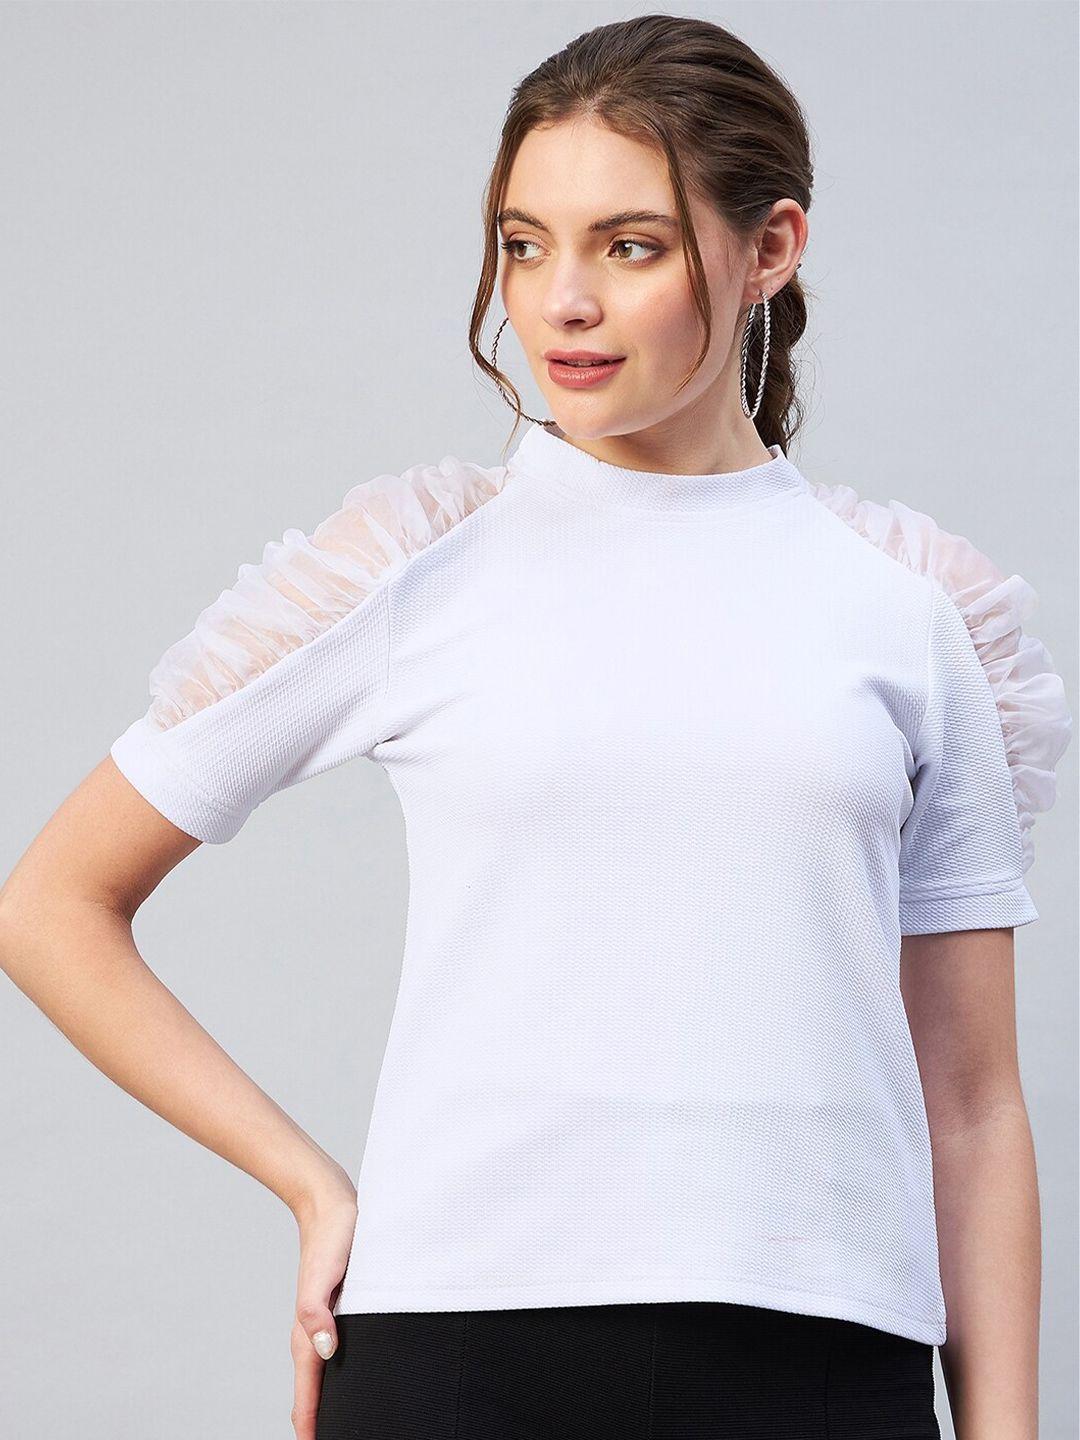 marie claire white puff sleeves top